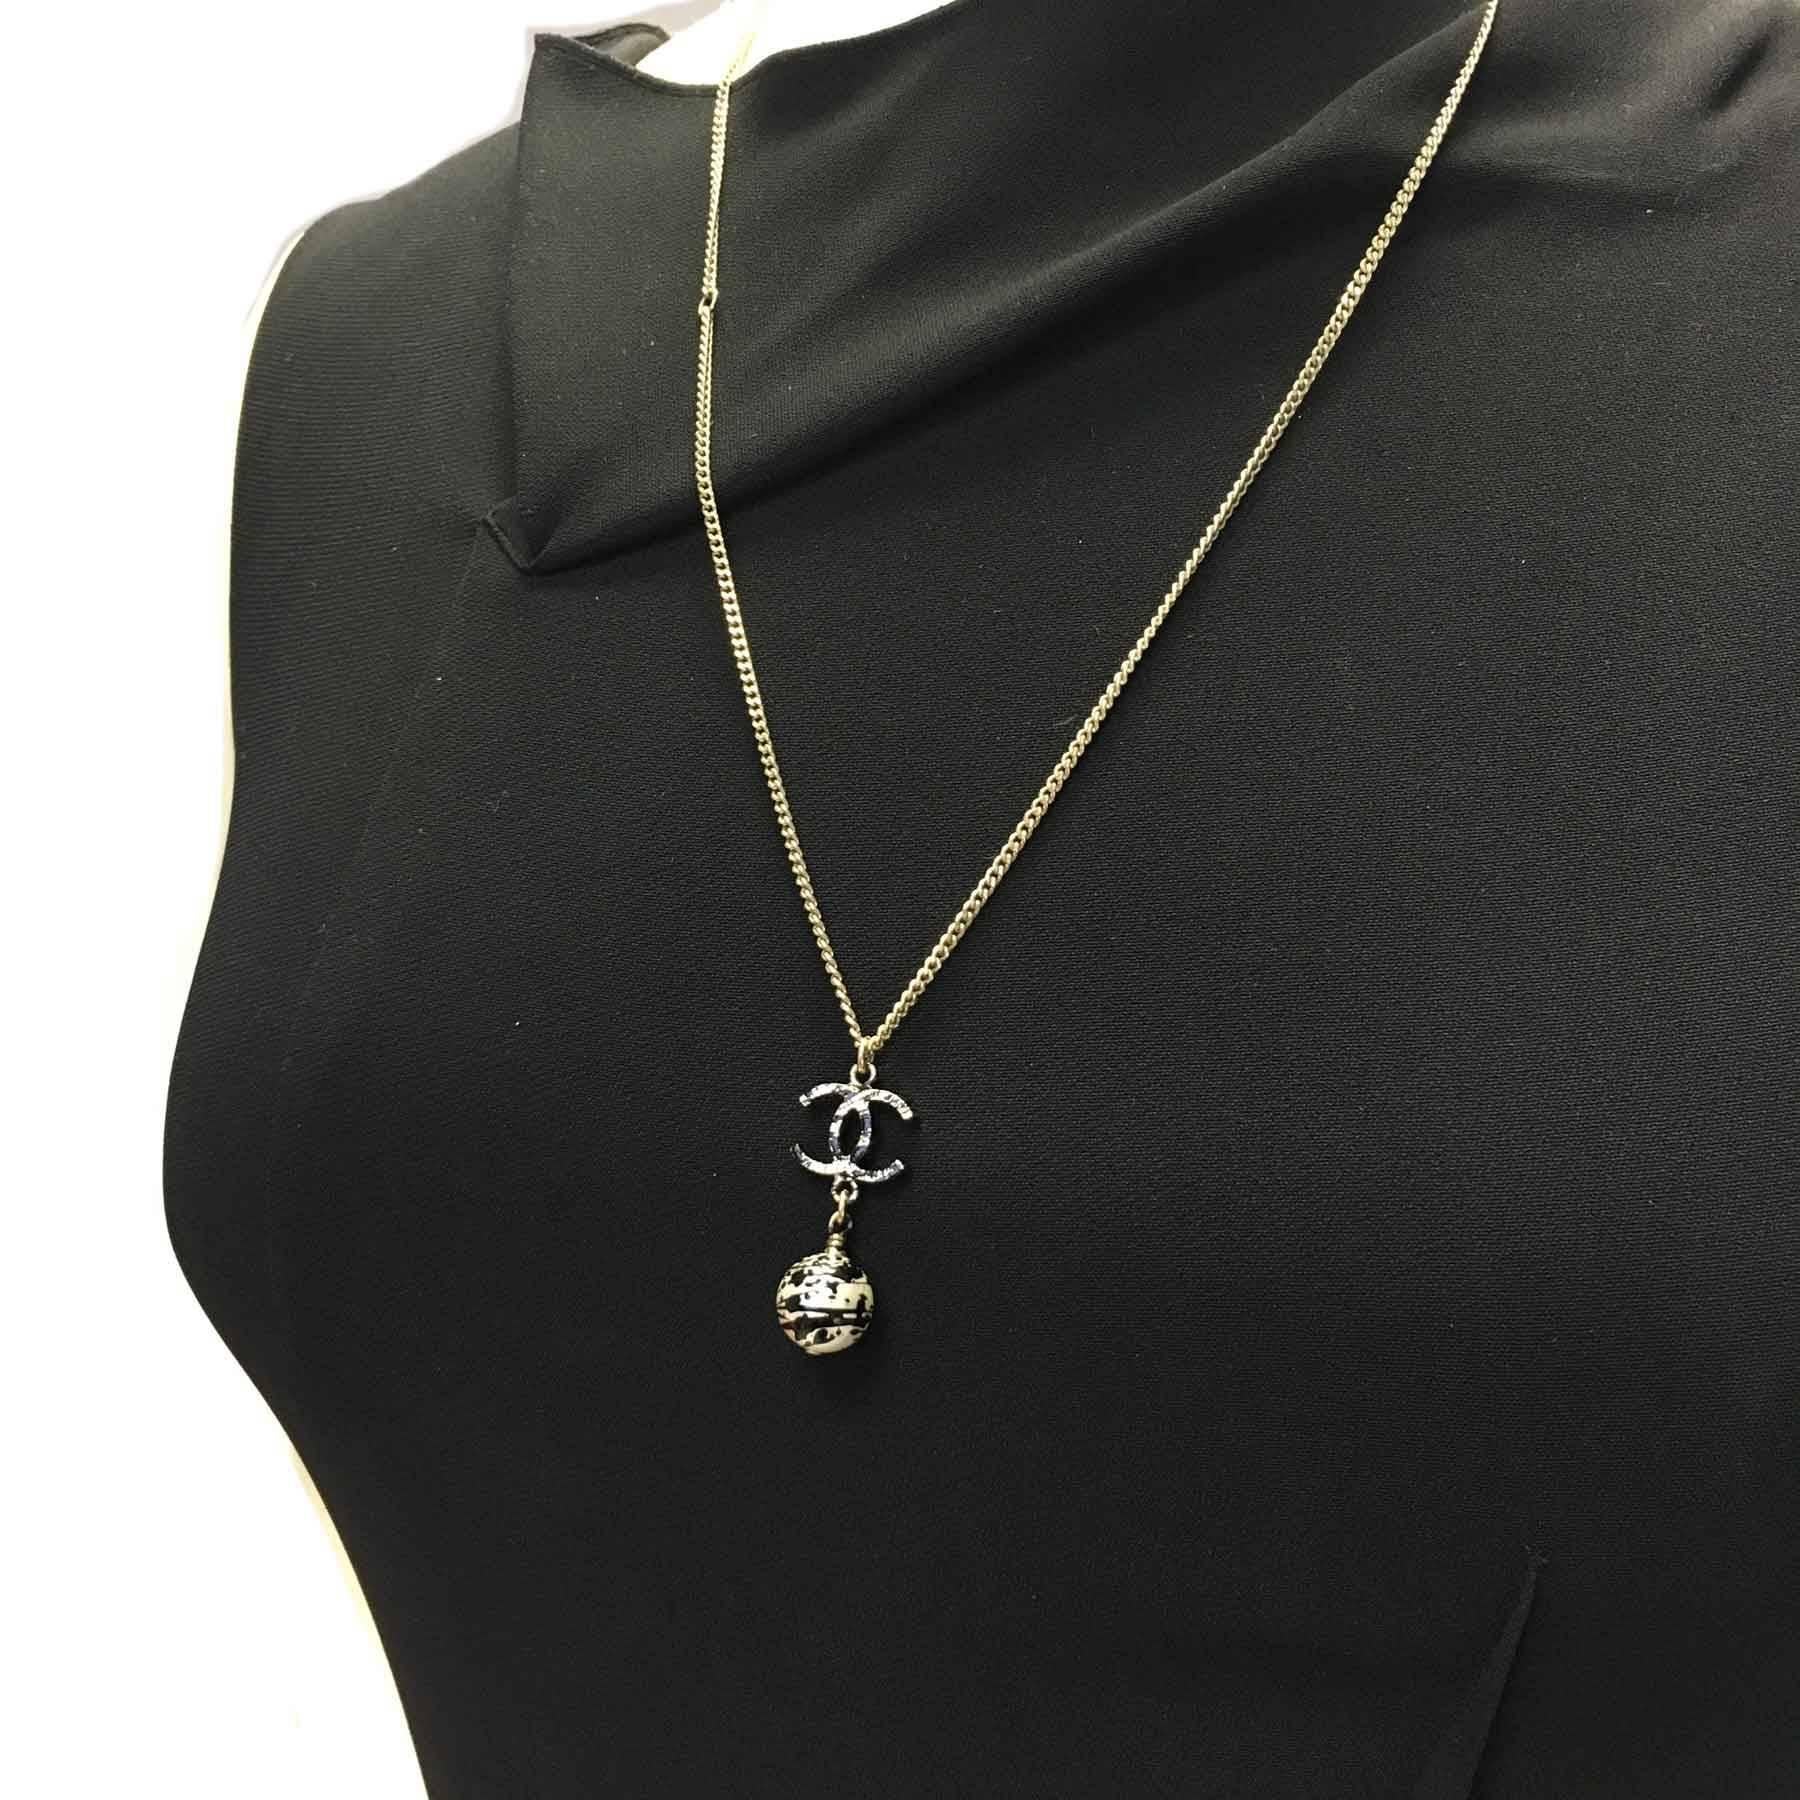 Beautiful Chanel necklace in gilded metal, pendant CC and pearl spotted with black color, graffiti effect. The chain ends in a small golden cc.

Dimensions: length at a first hole: 42 cm, last hole: 60 cm.

Pendant: 3,5 cm long

Delivered in a dust